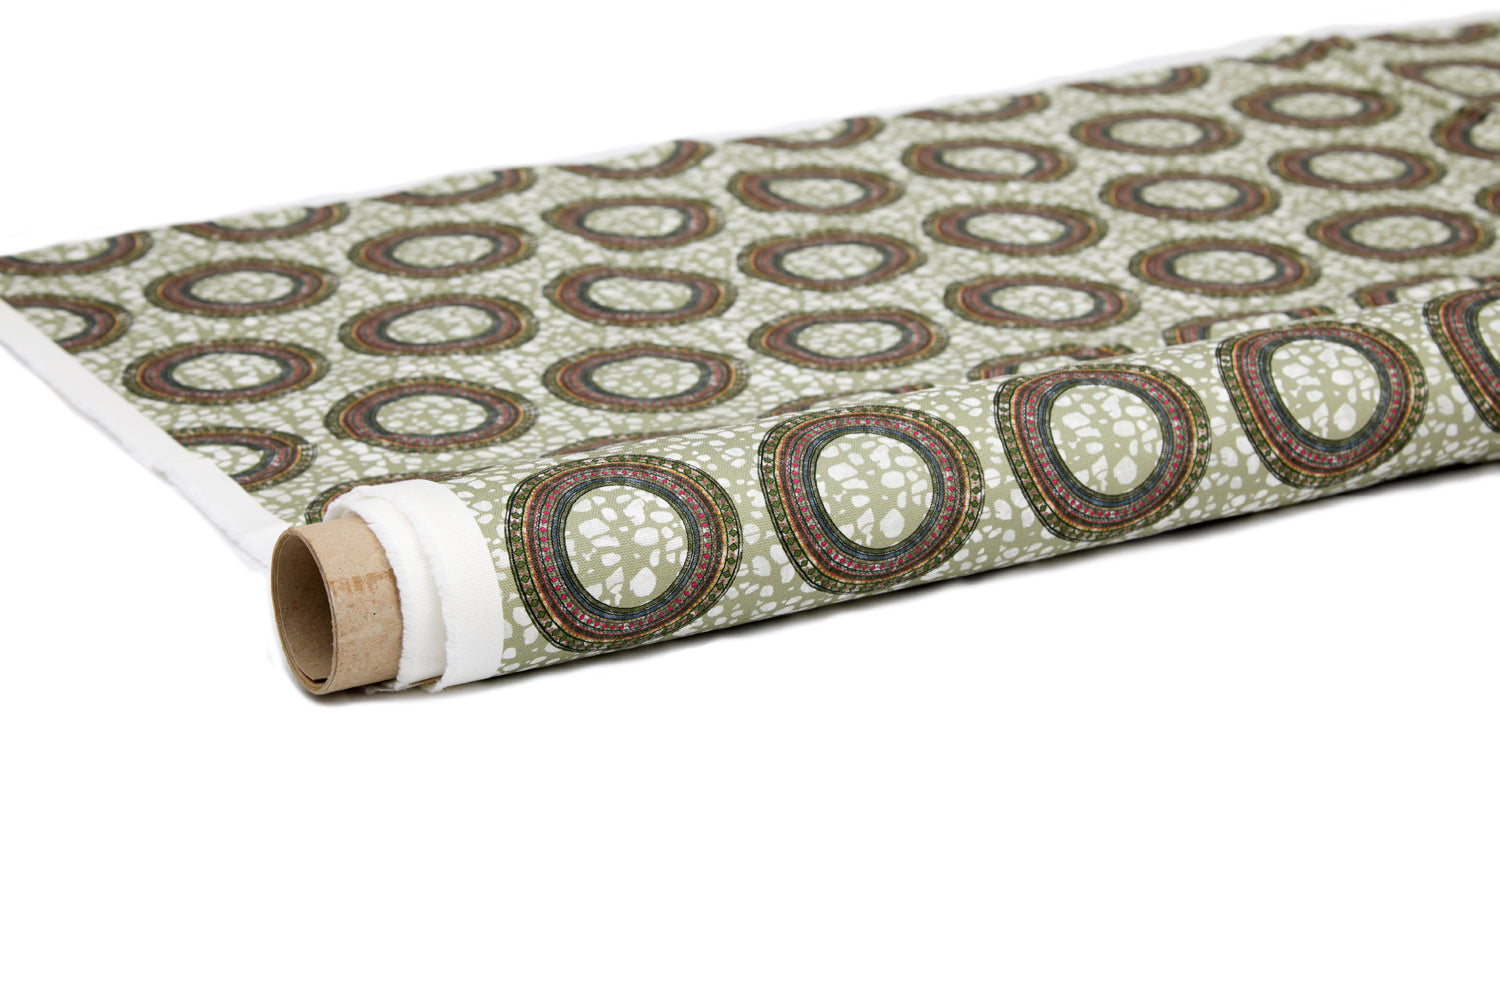 Partially unrolled fabric in an intricate circular print in shades of green, orange and cream.